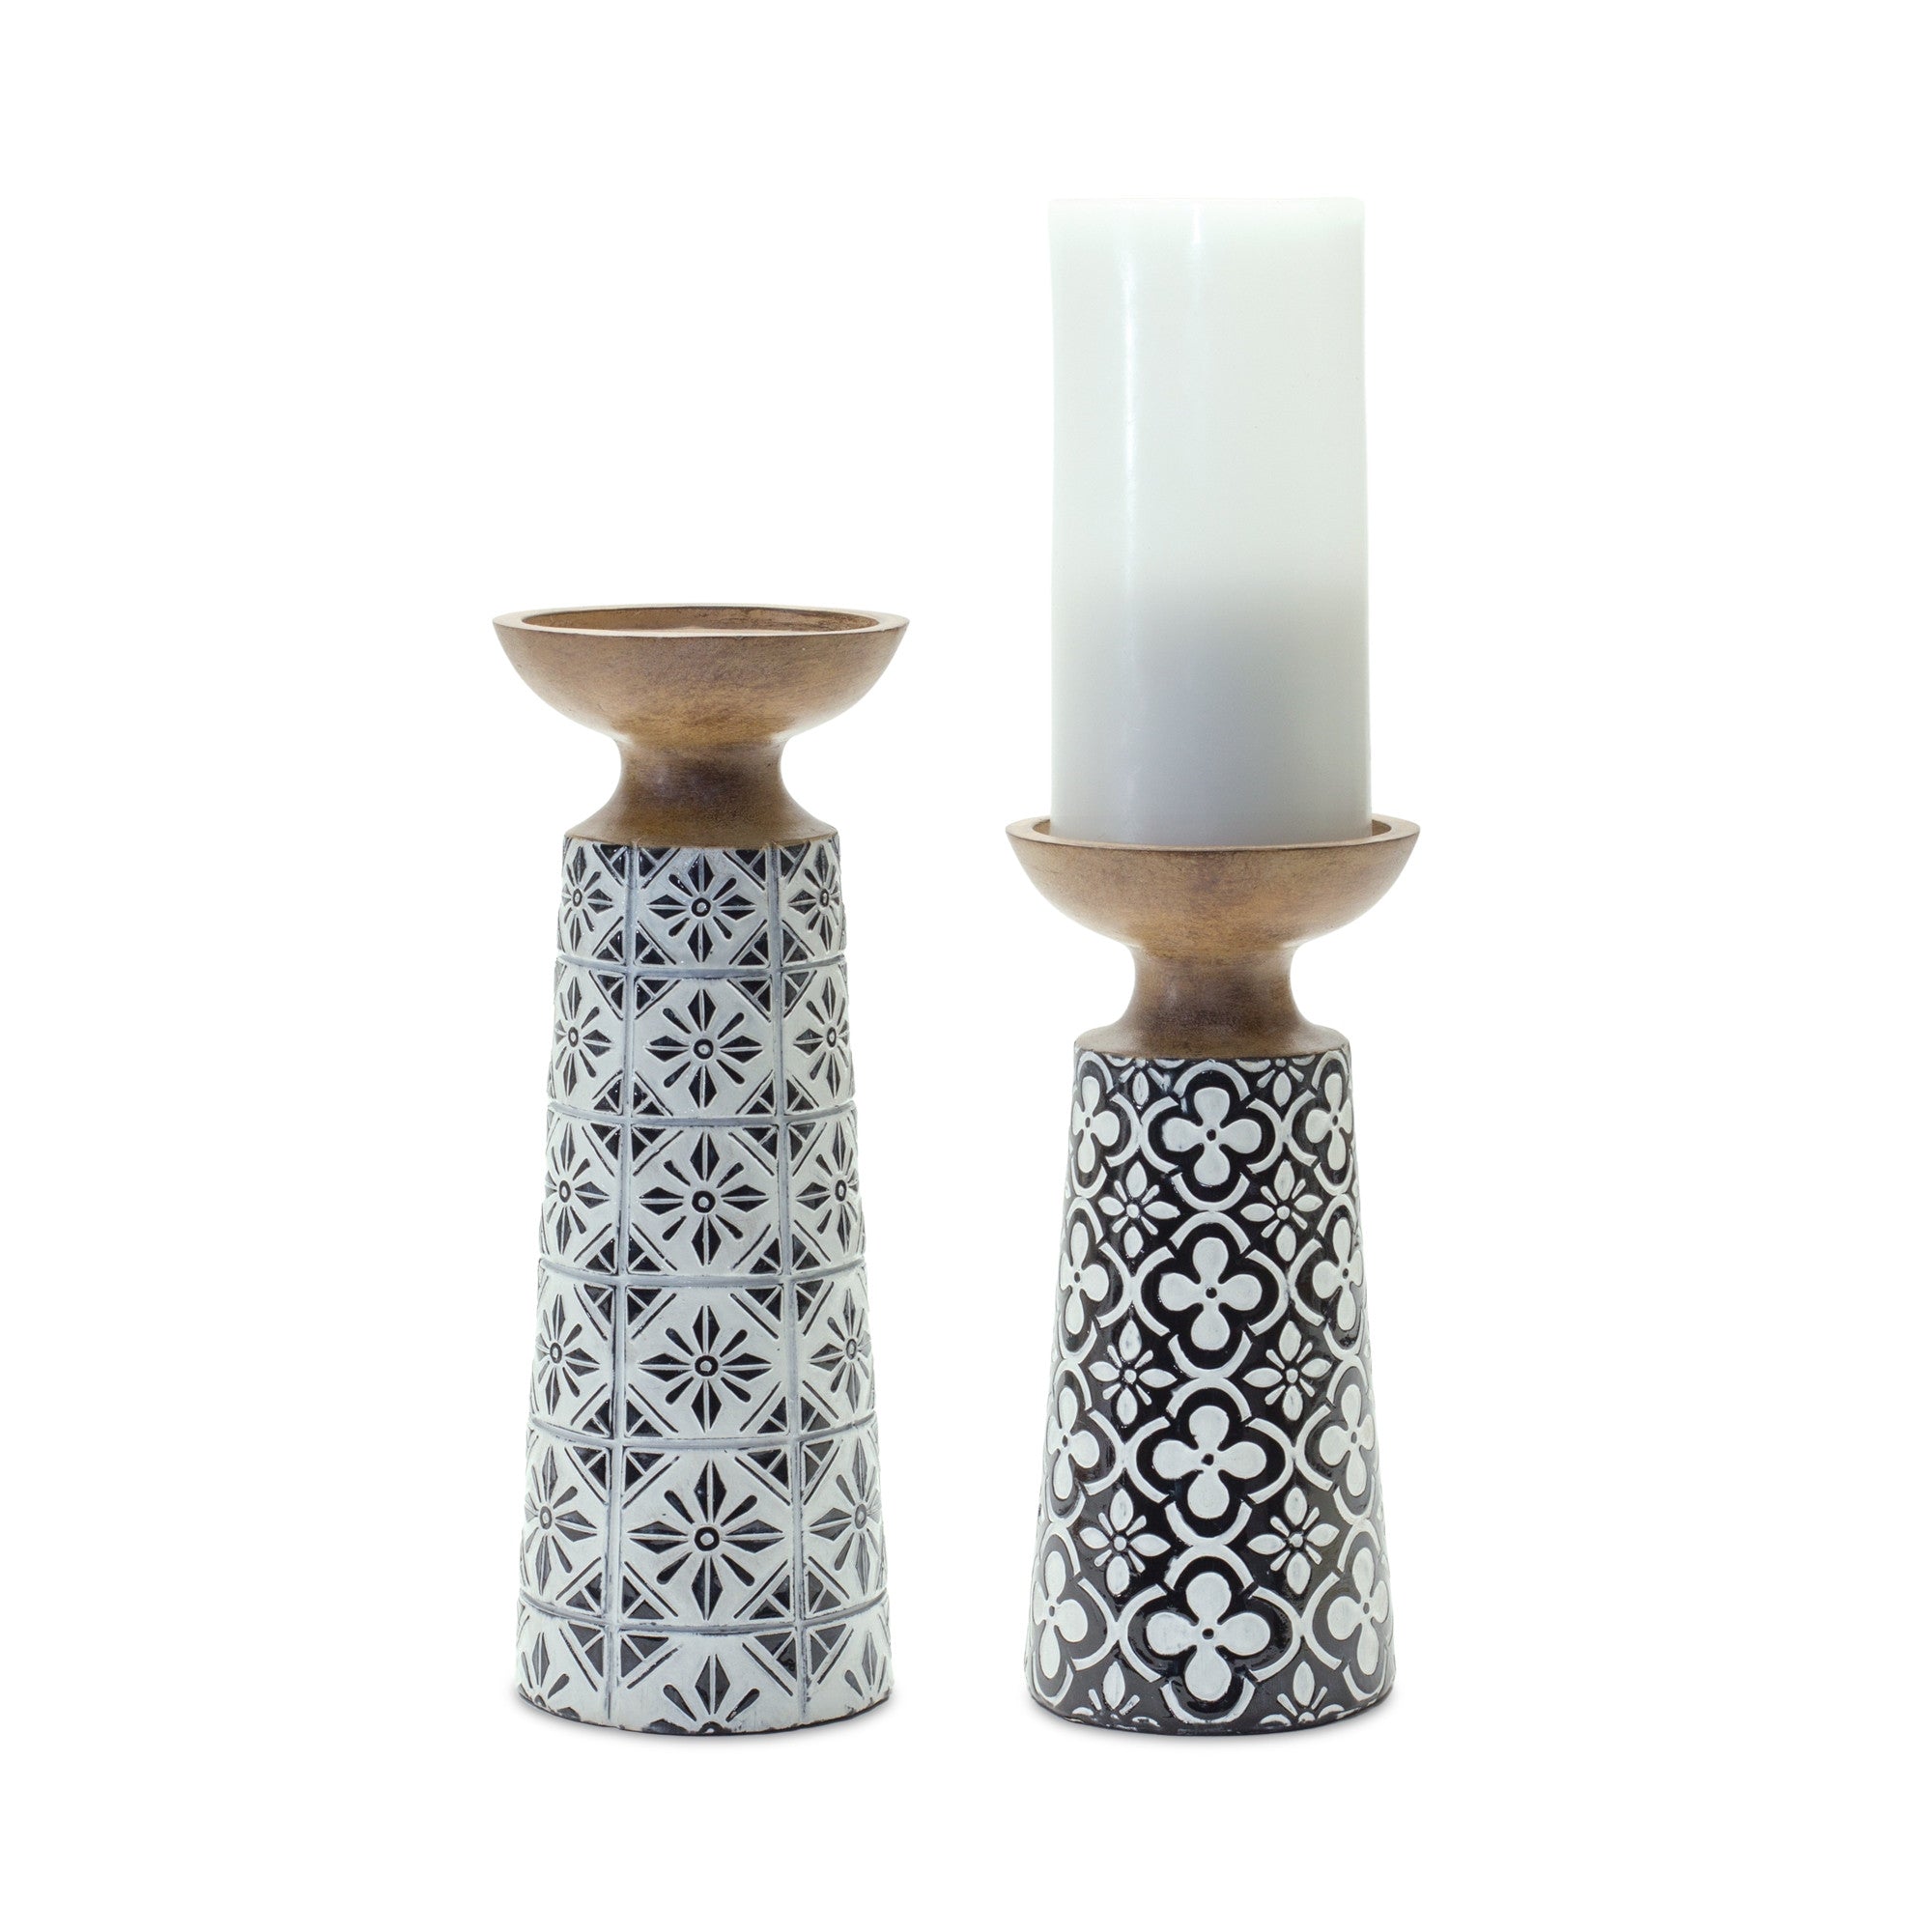 Set-Of-Two-White-Flameless-Tabletop-Candle-Holders